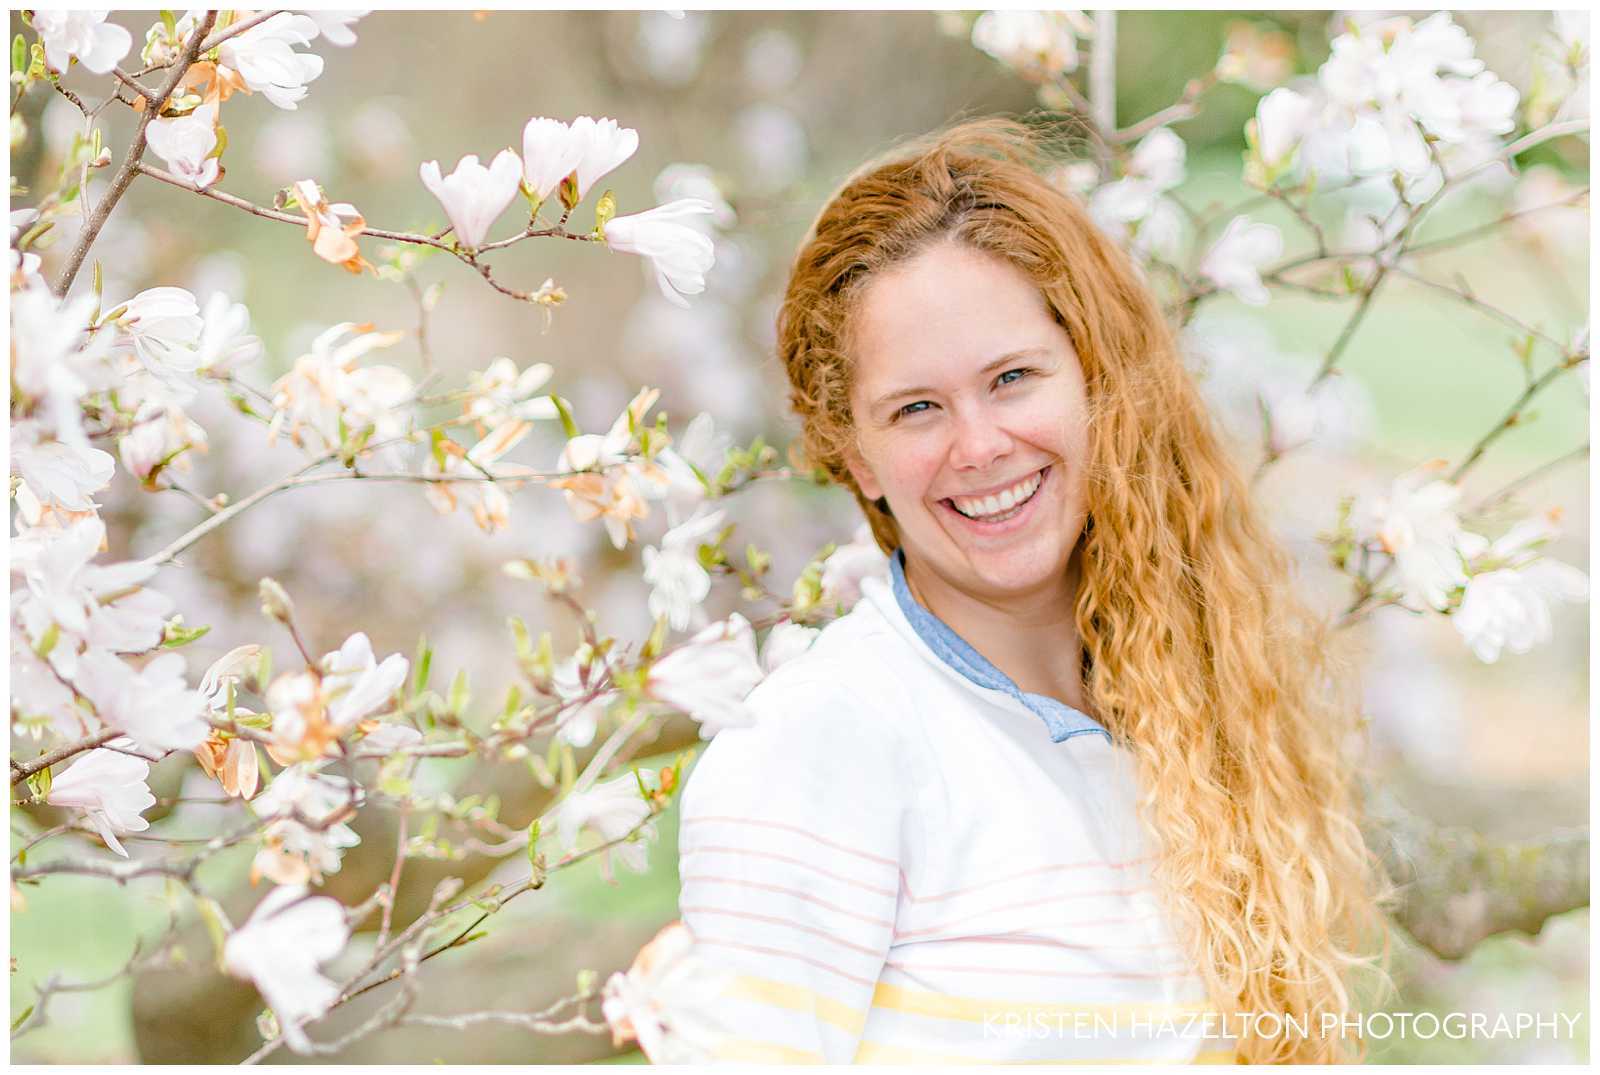 Portrait of a Redheaded woman smiling in front of white star magnolias